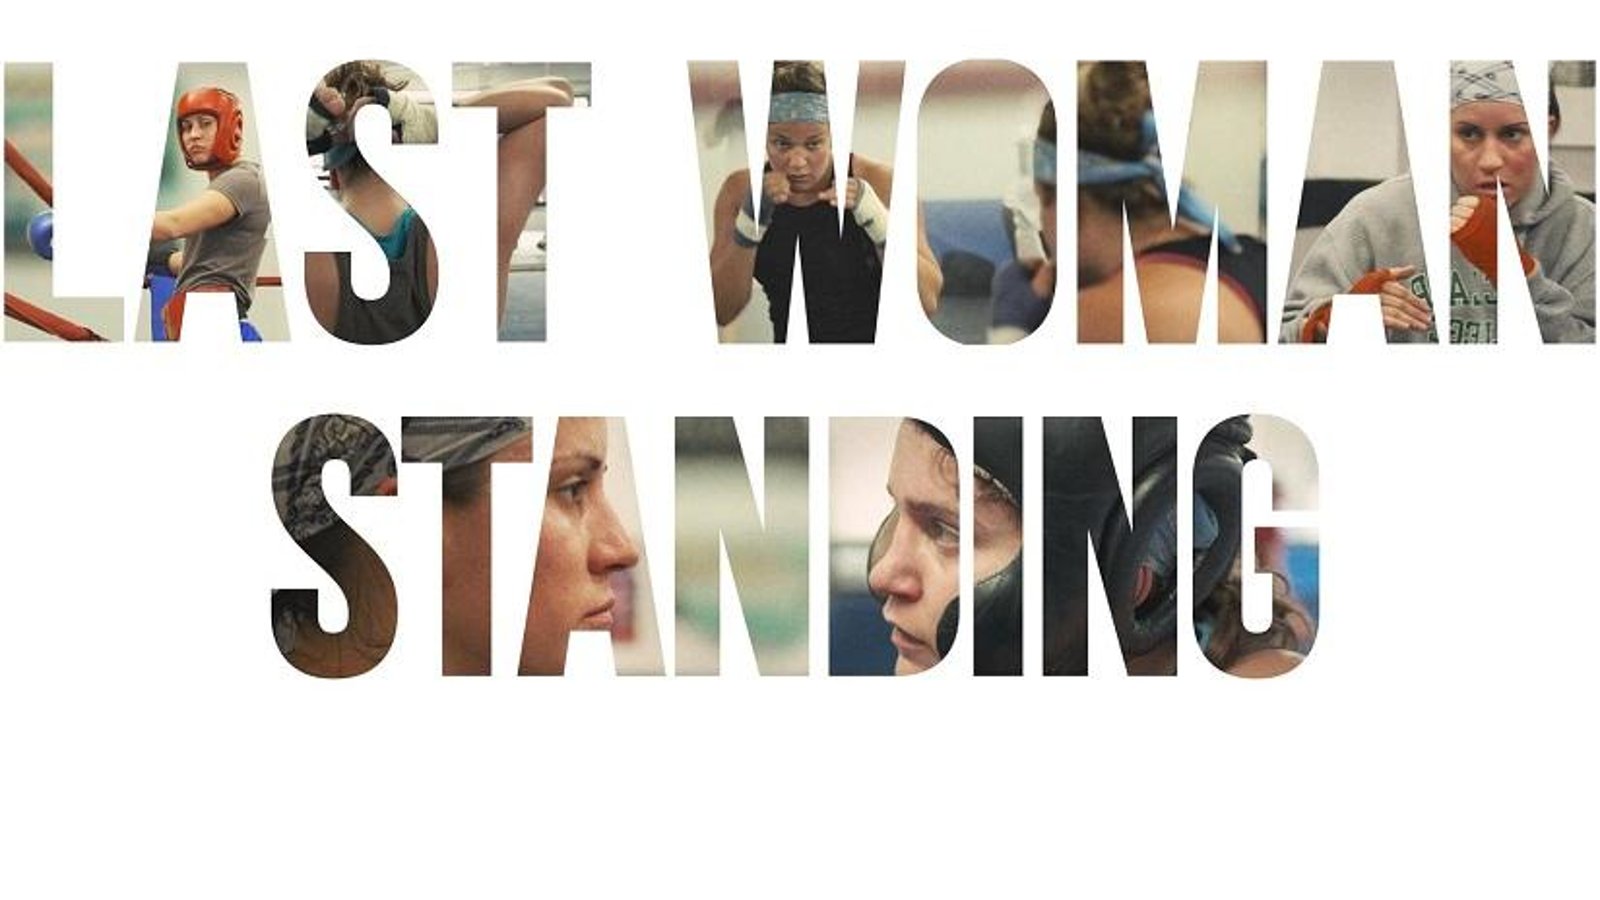 Last Woman Standing - Two Friends Fight for a Chance at an Olympic Medal